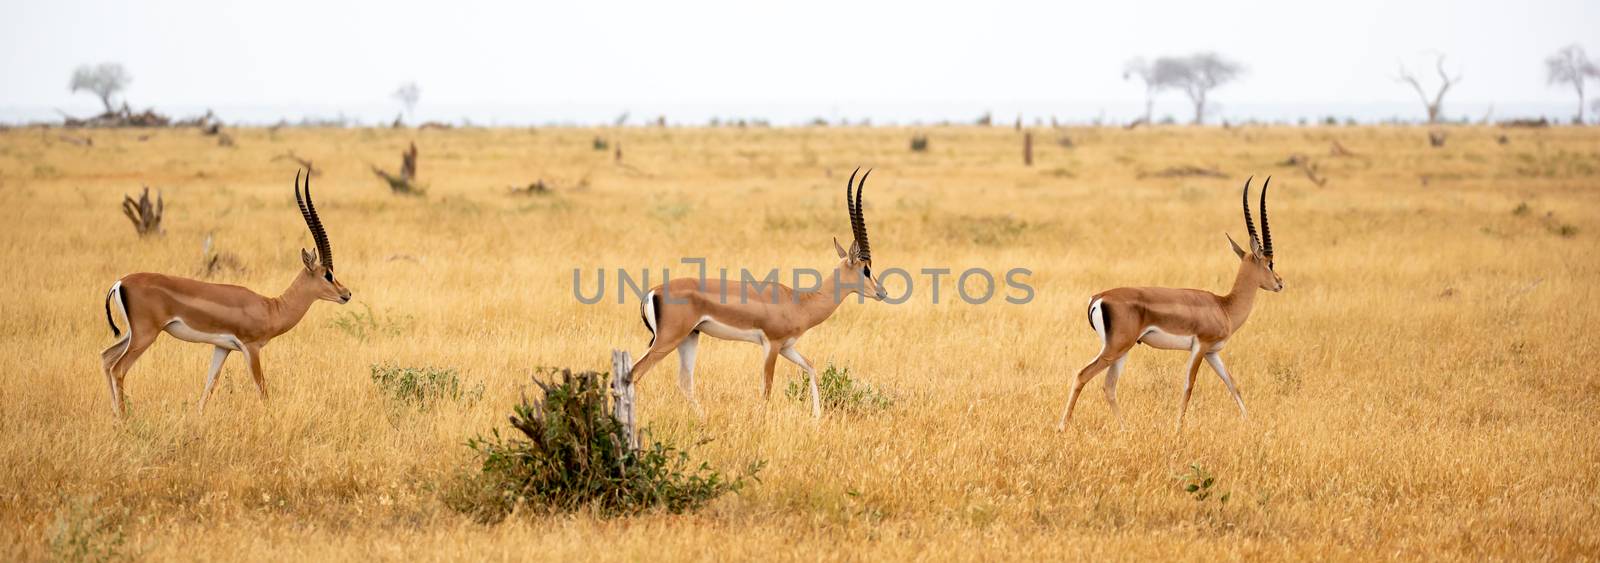 An antelopes in the grassland of the savannah of Kenya by 25ehaag6